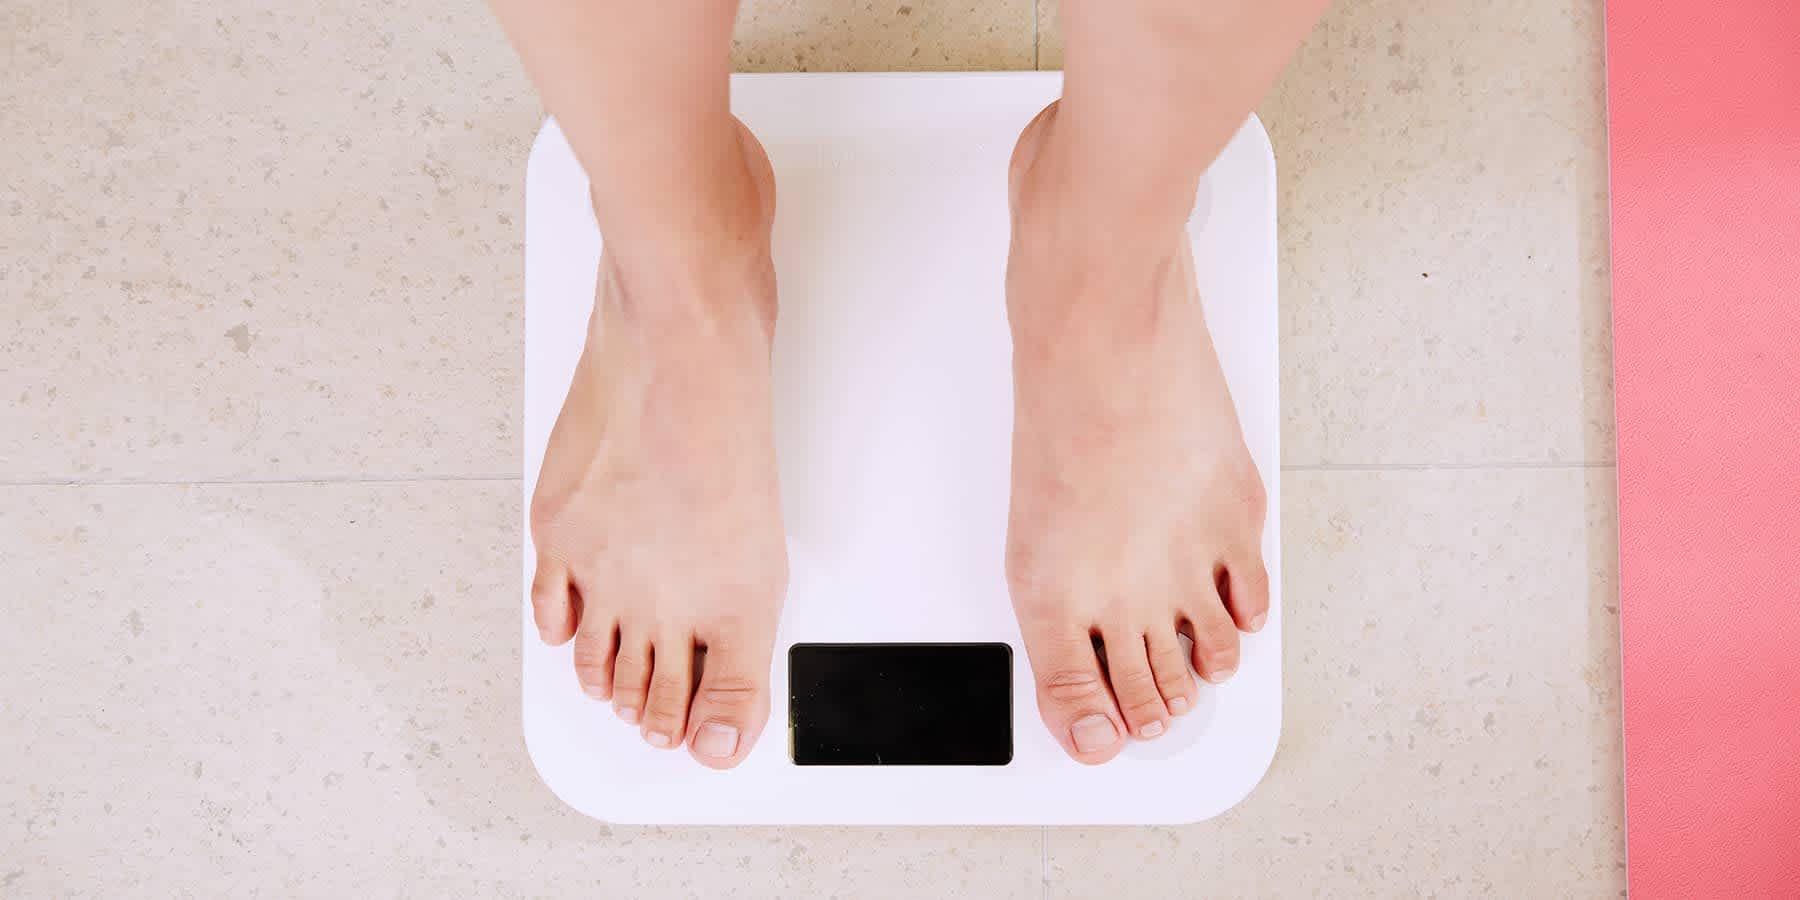 Person standing on bathroom scale while wondering if weight gain can cause back pain